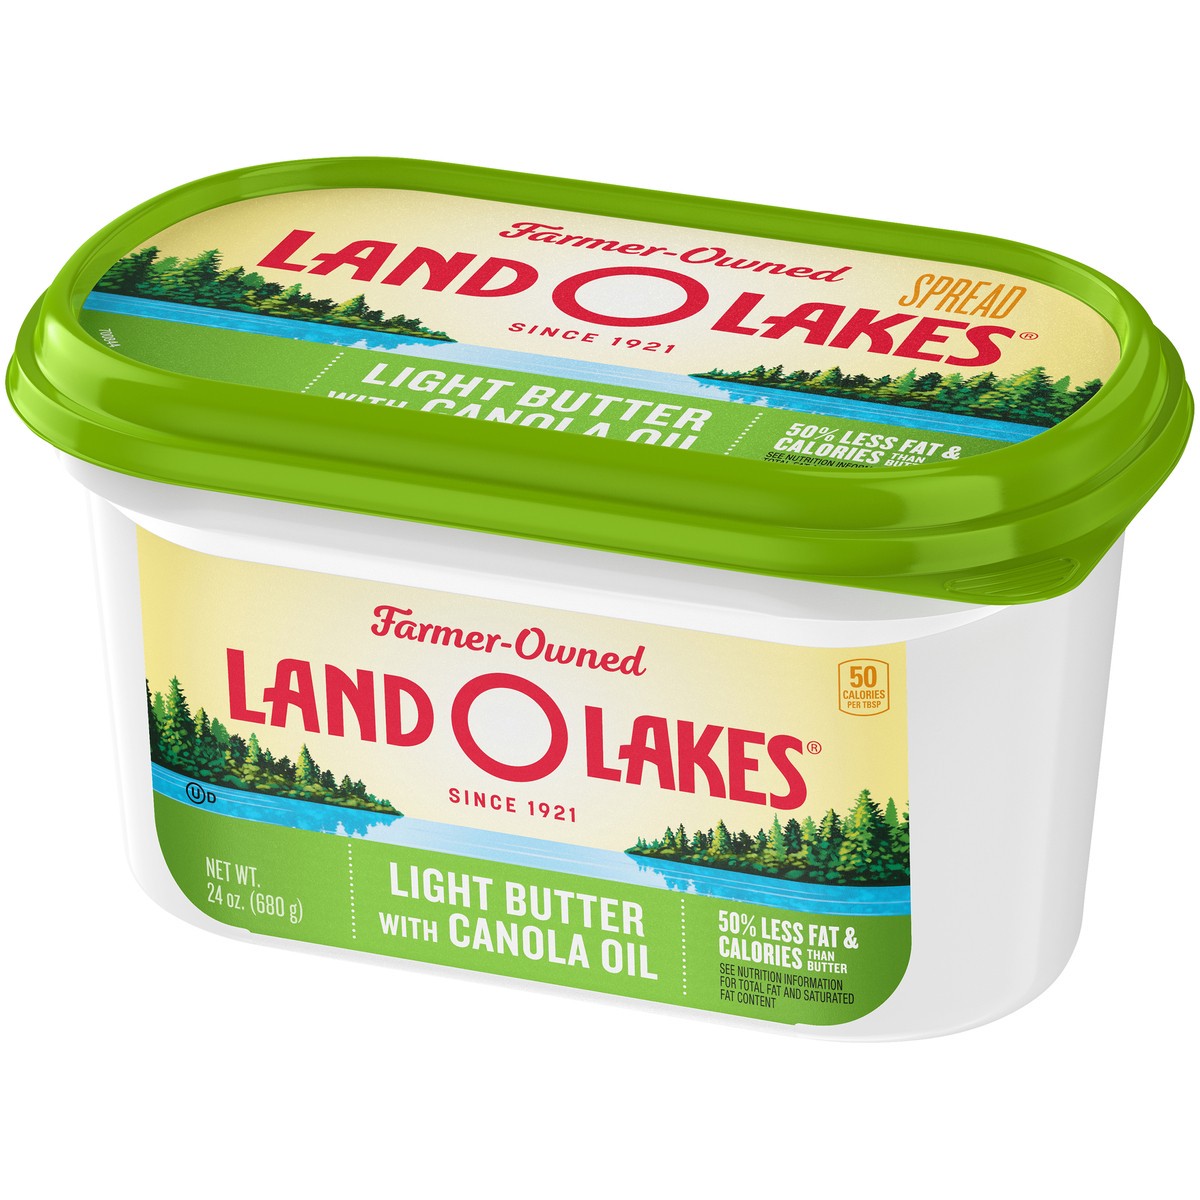 slide 11 of 11, Land O'Lakes Light Butter with Canola Oil, 24 oz